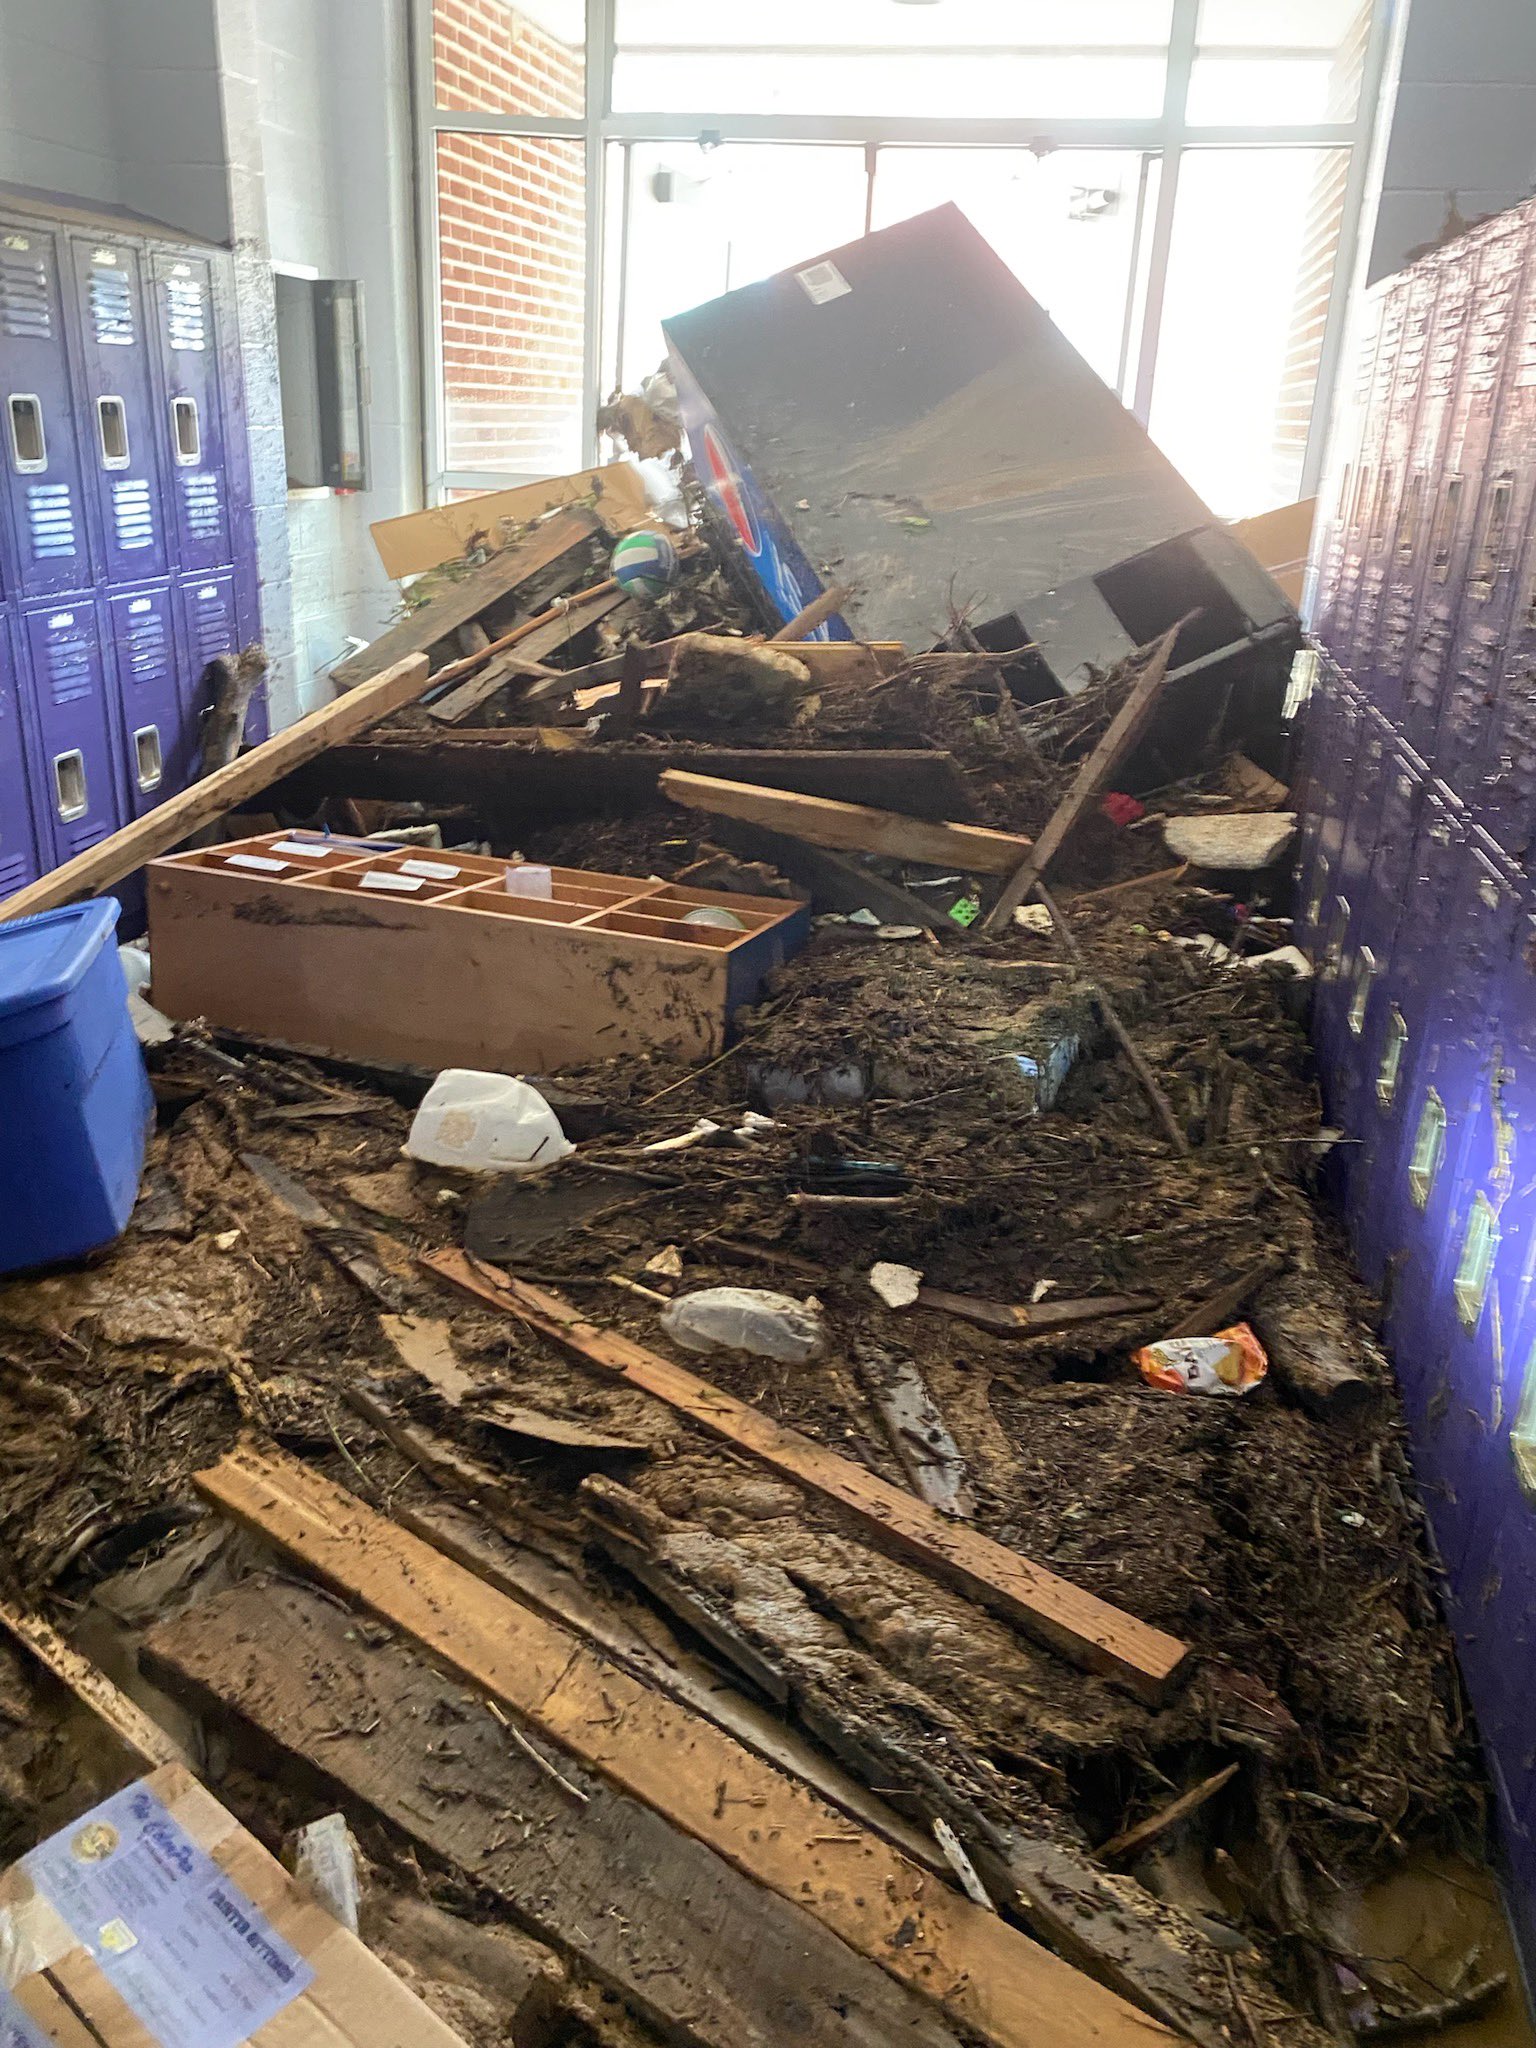 Buckhorn School in Perry County severely damaged due to flash flooding.